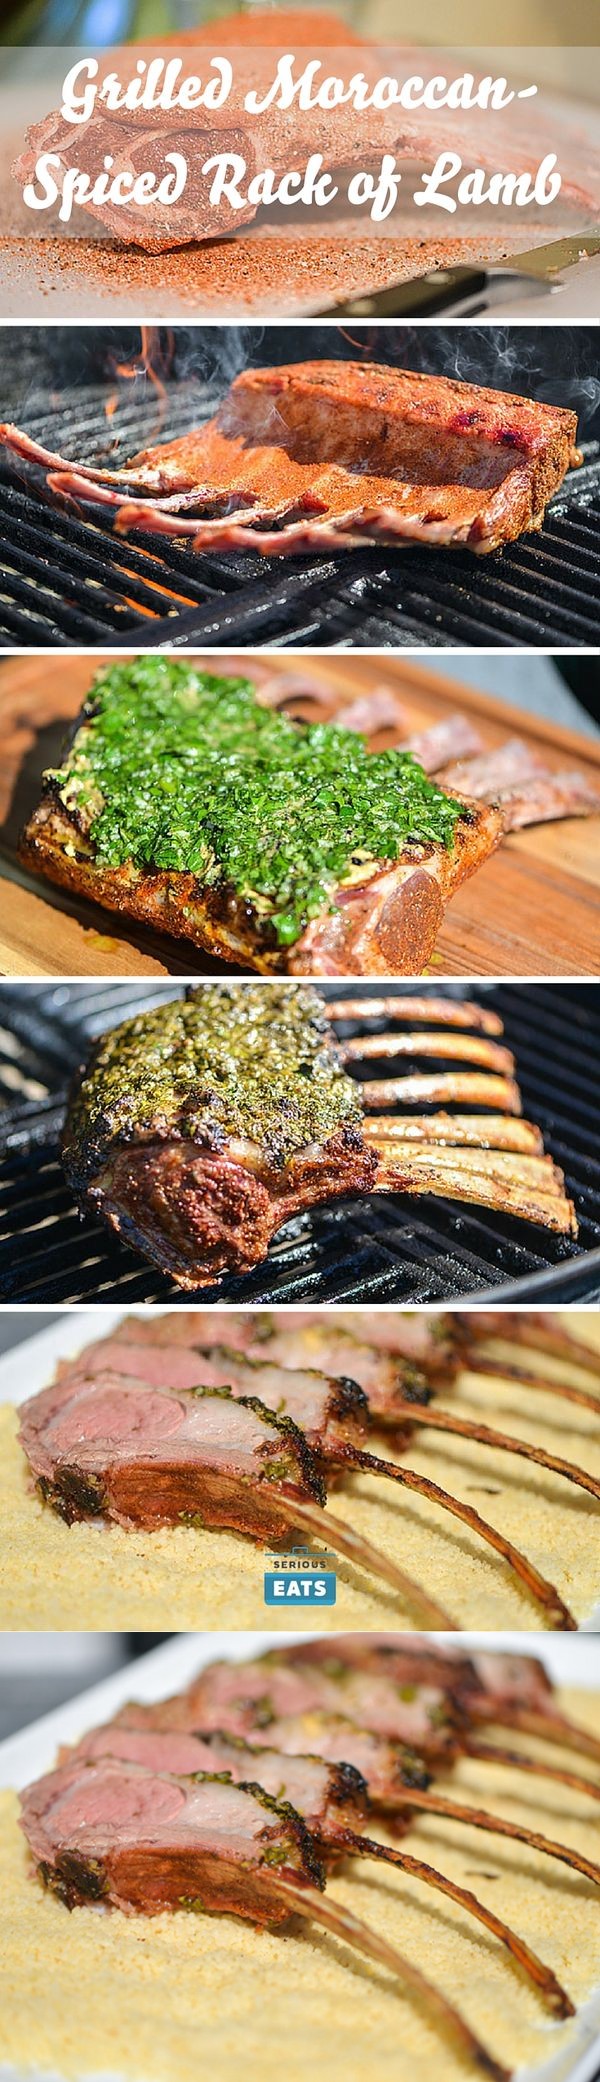 Grilled Moroccan-Spiced Rack of Lamb